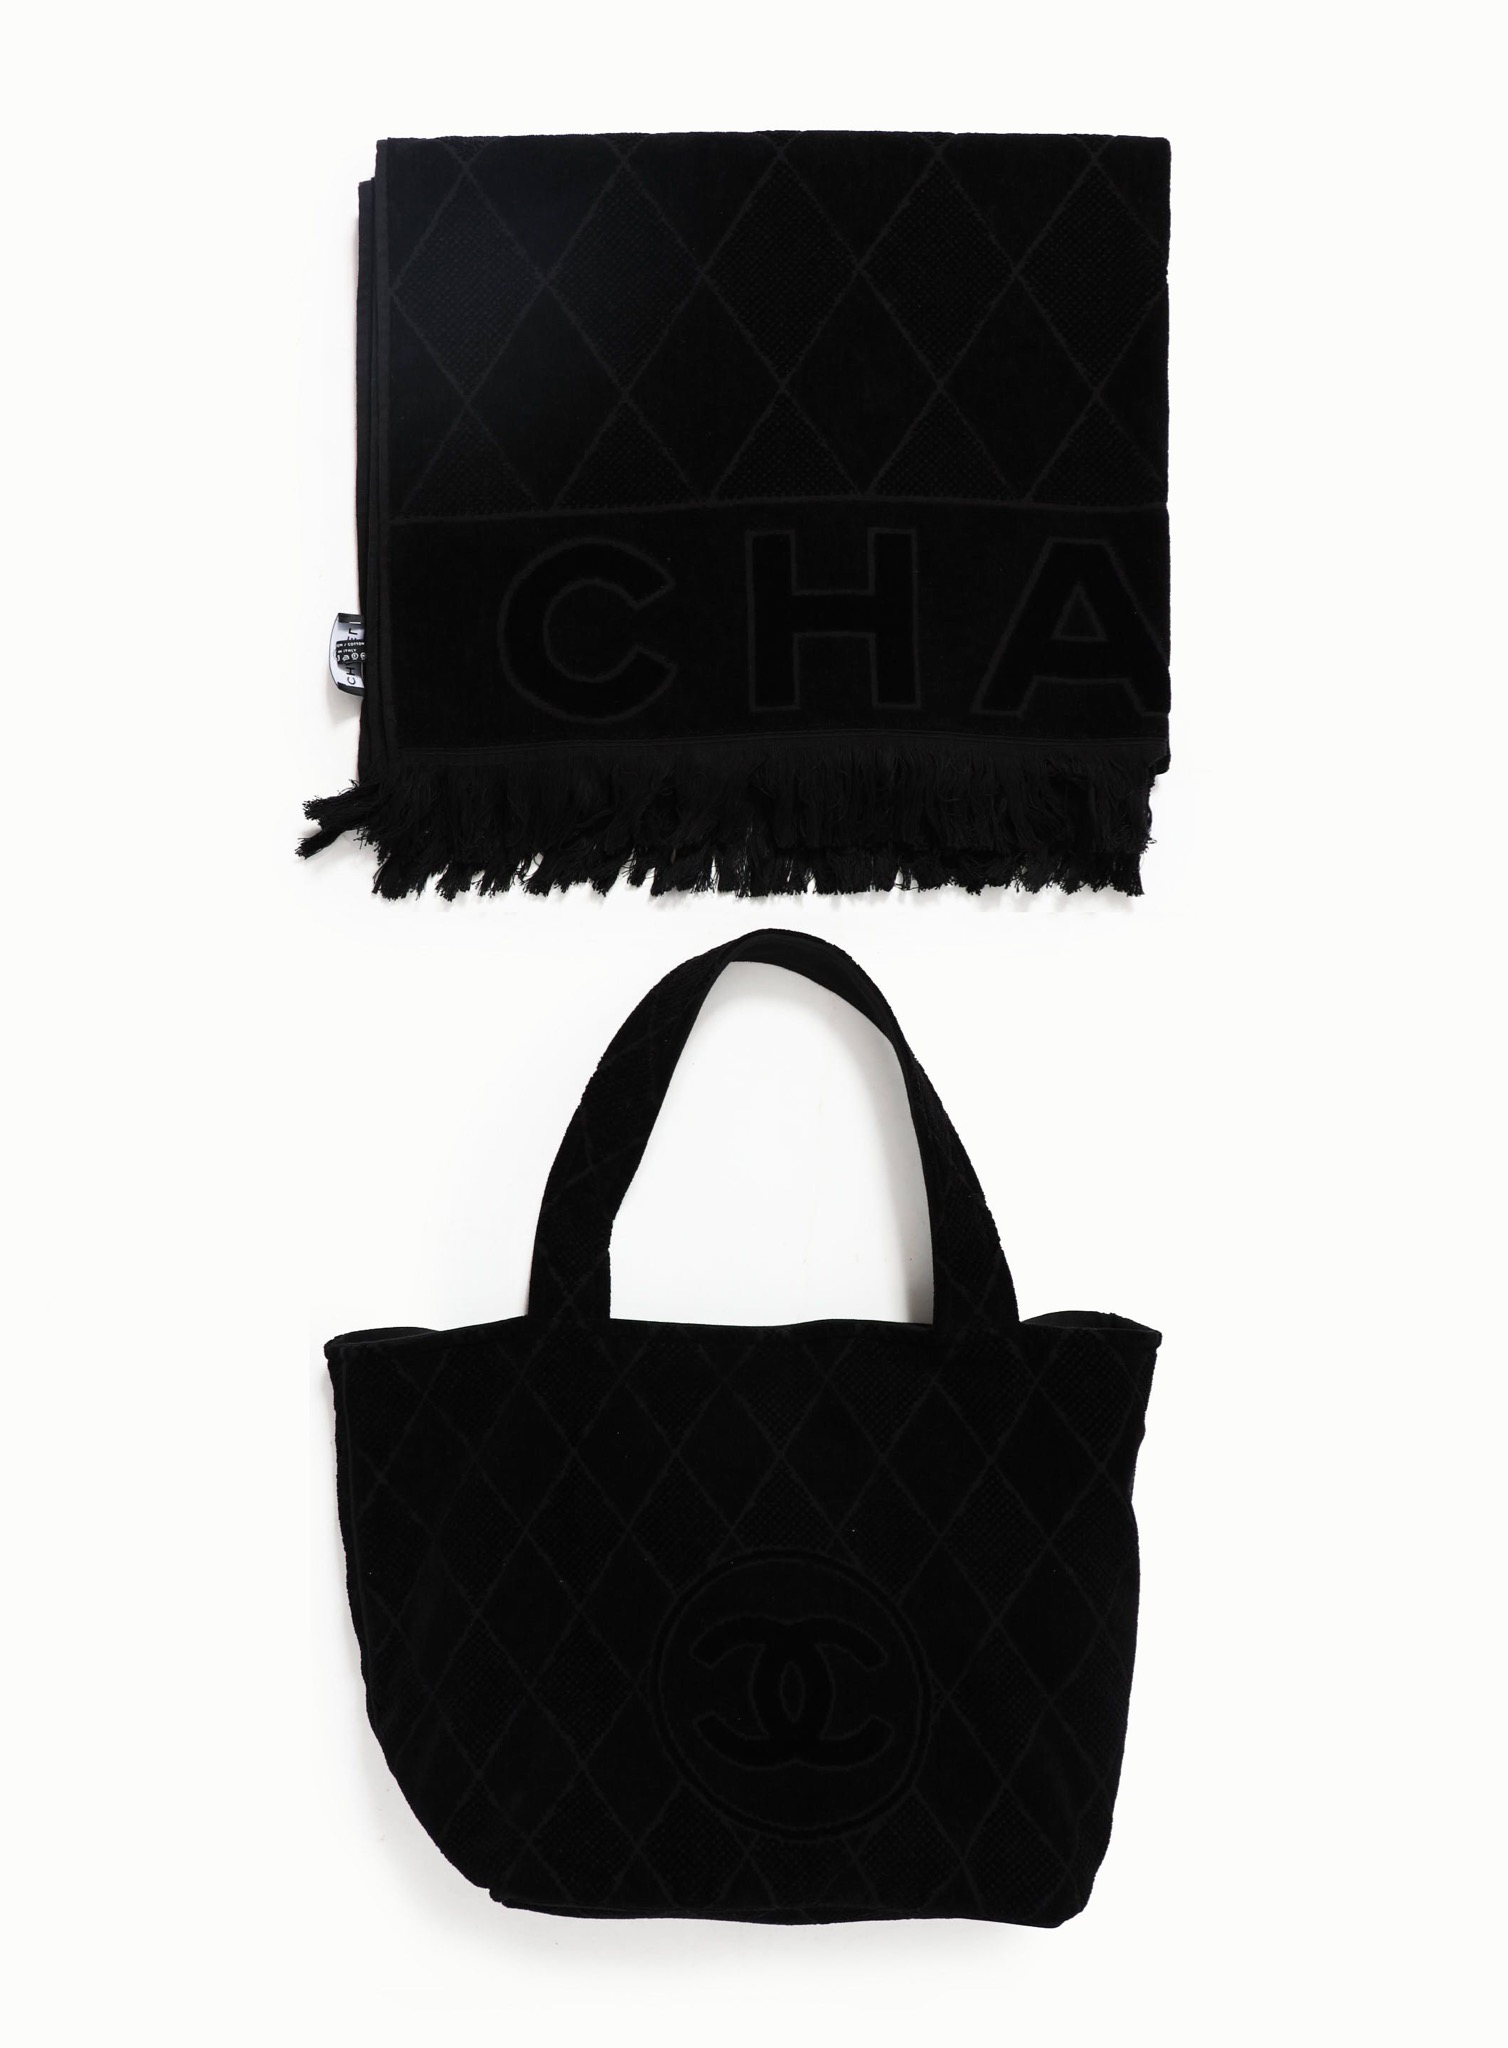 Chanel Shopping Top Handle Tote Cotton Beach Black and White Terry Cloth Bag